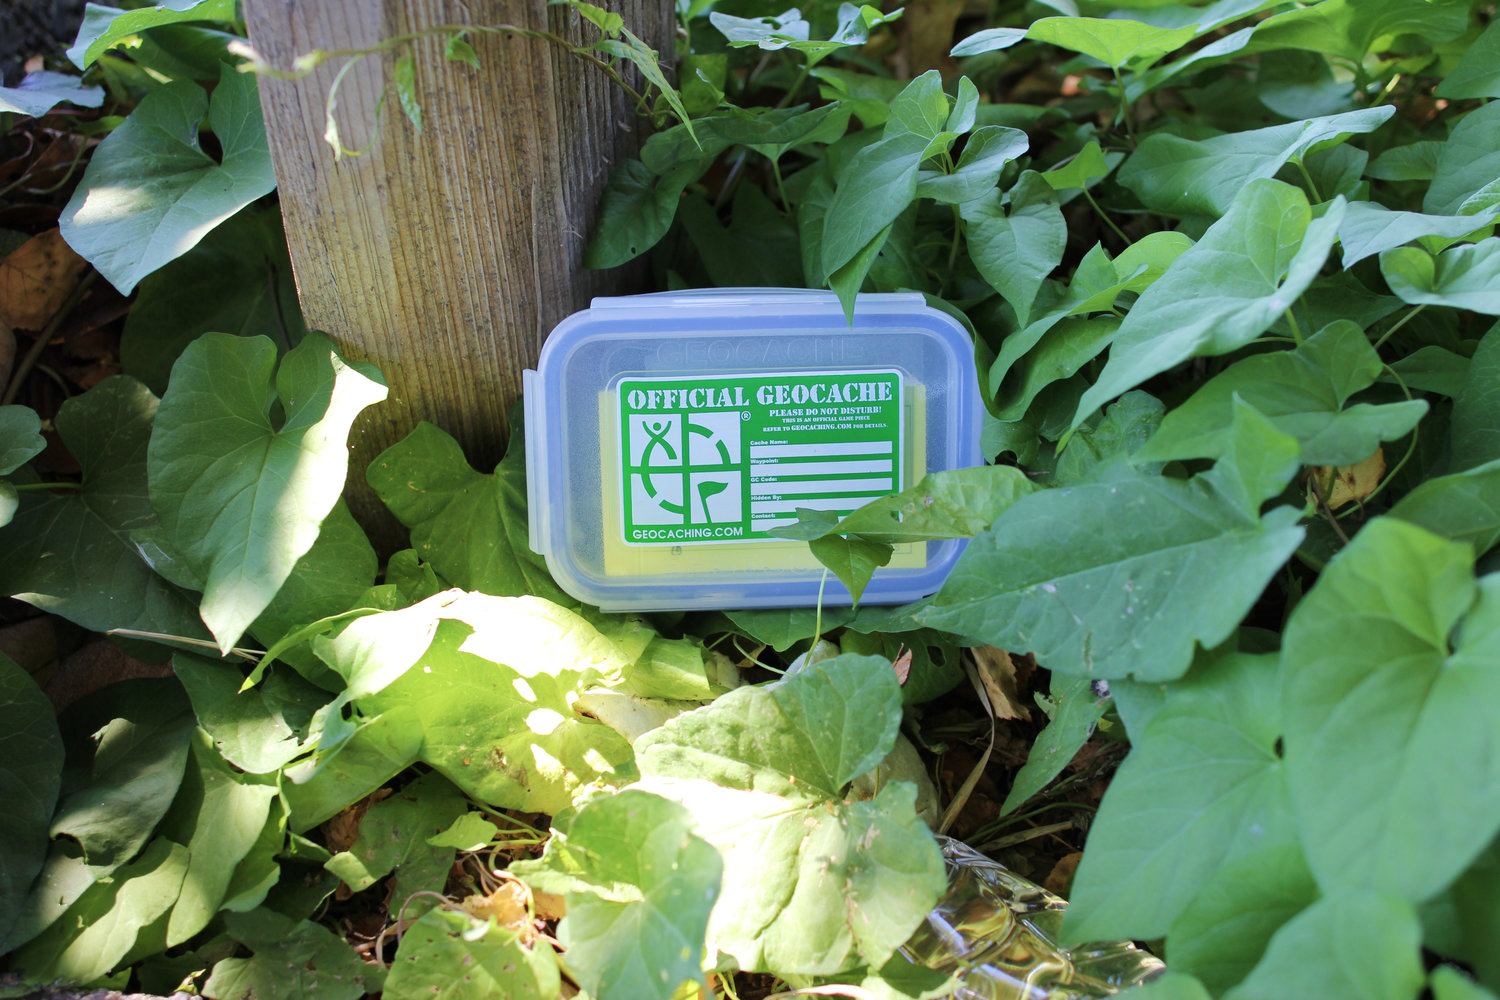 Geocaches can be marked with an official sticker.